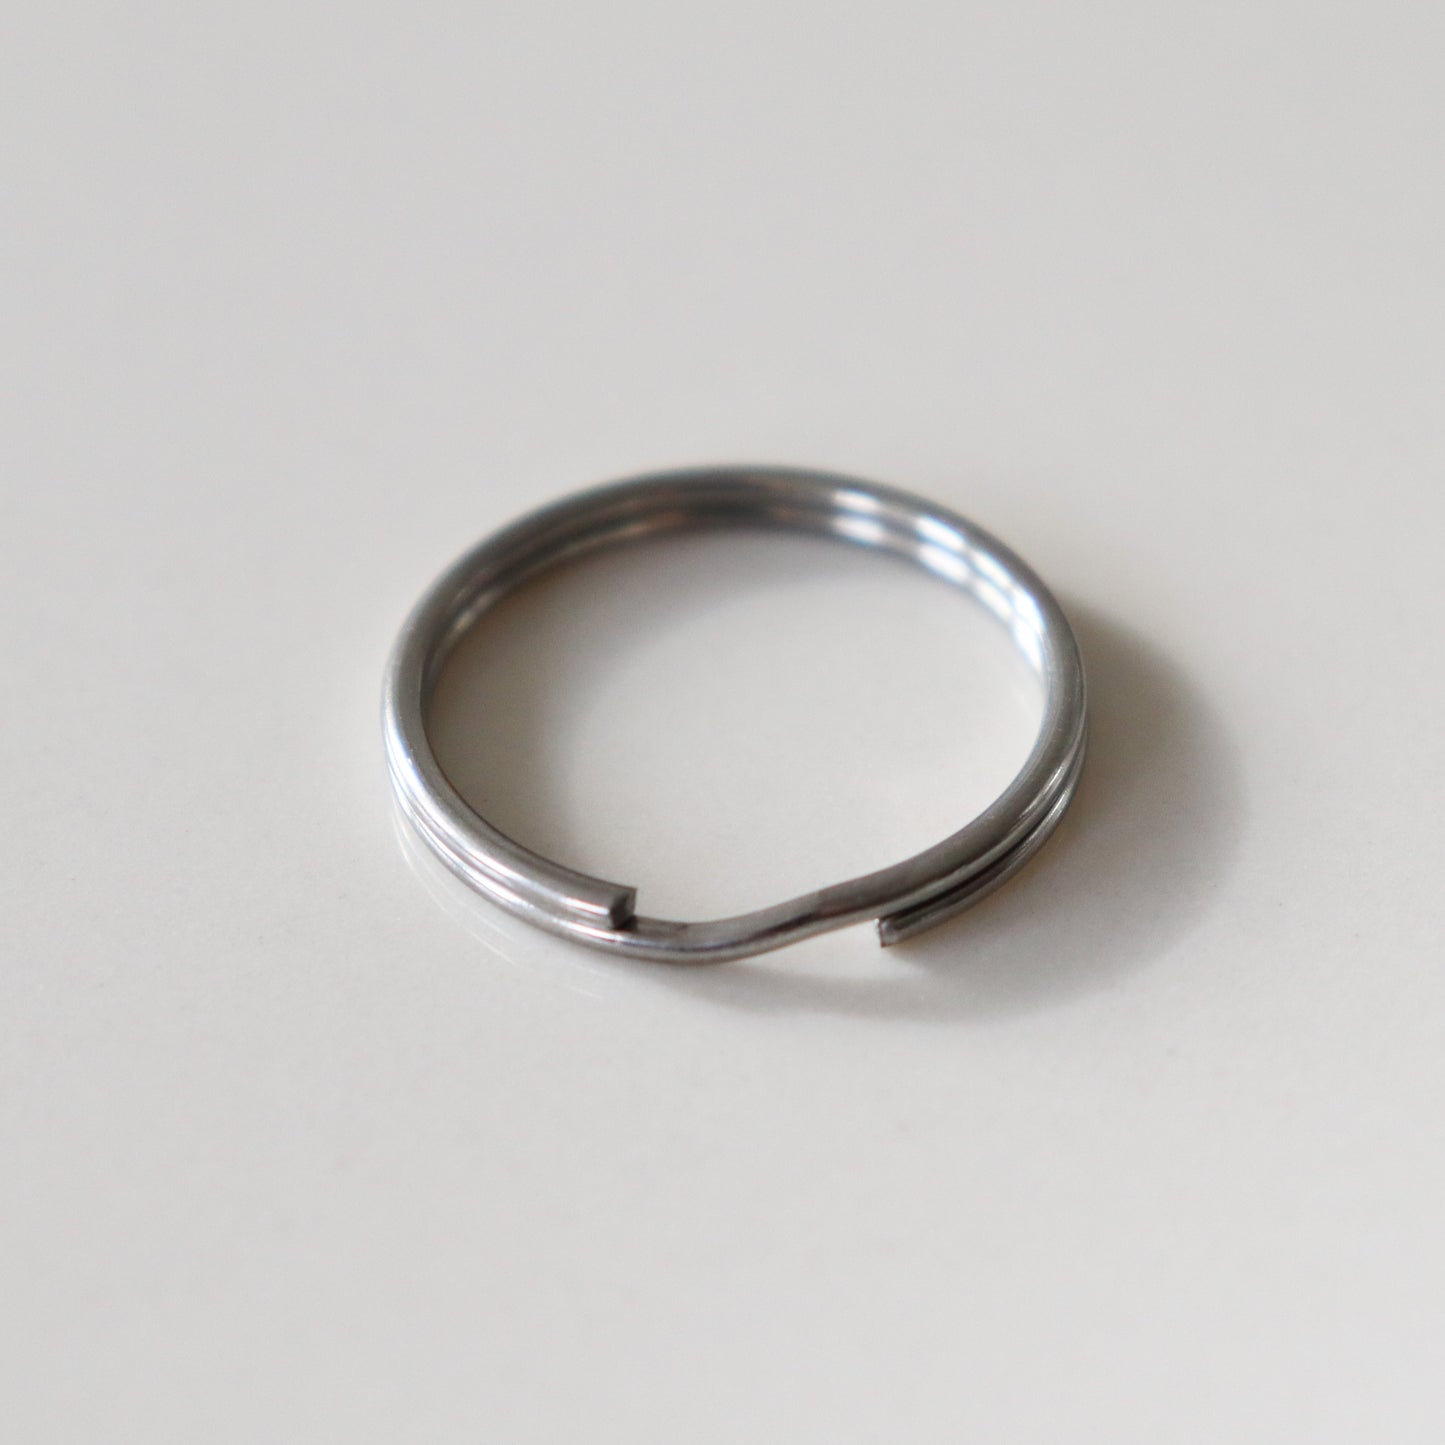 25mm Round Stainless Steel Key Ring